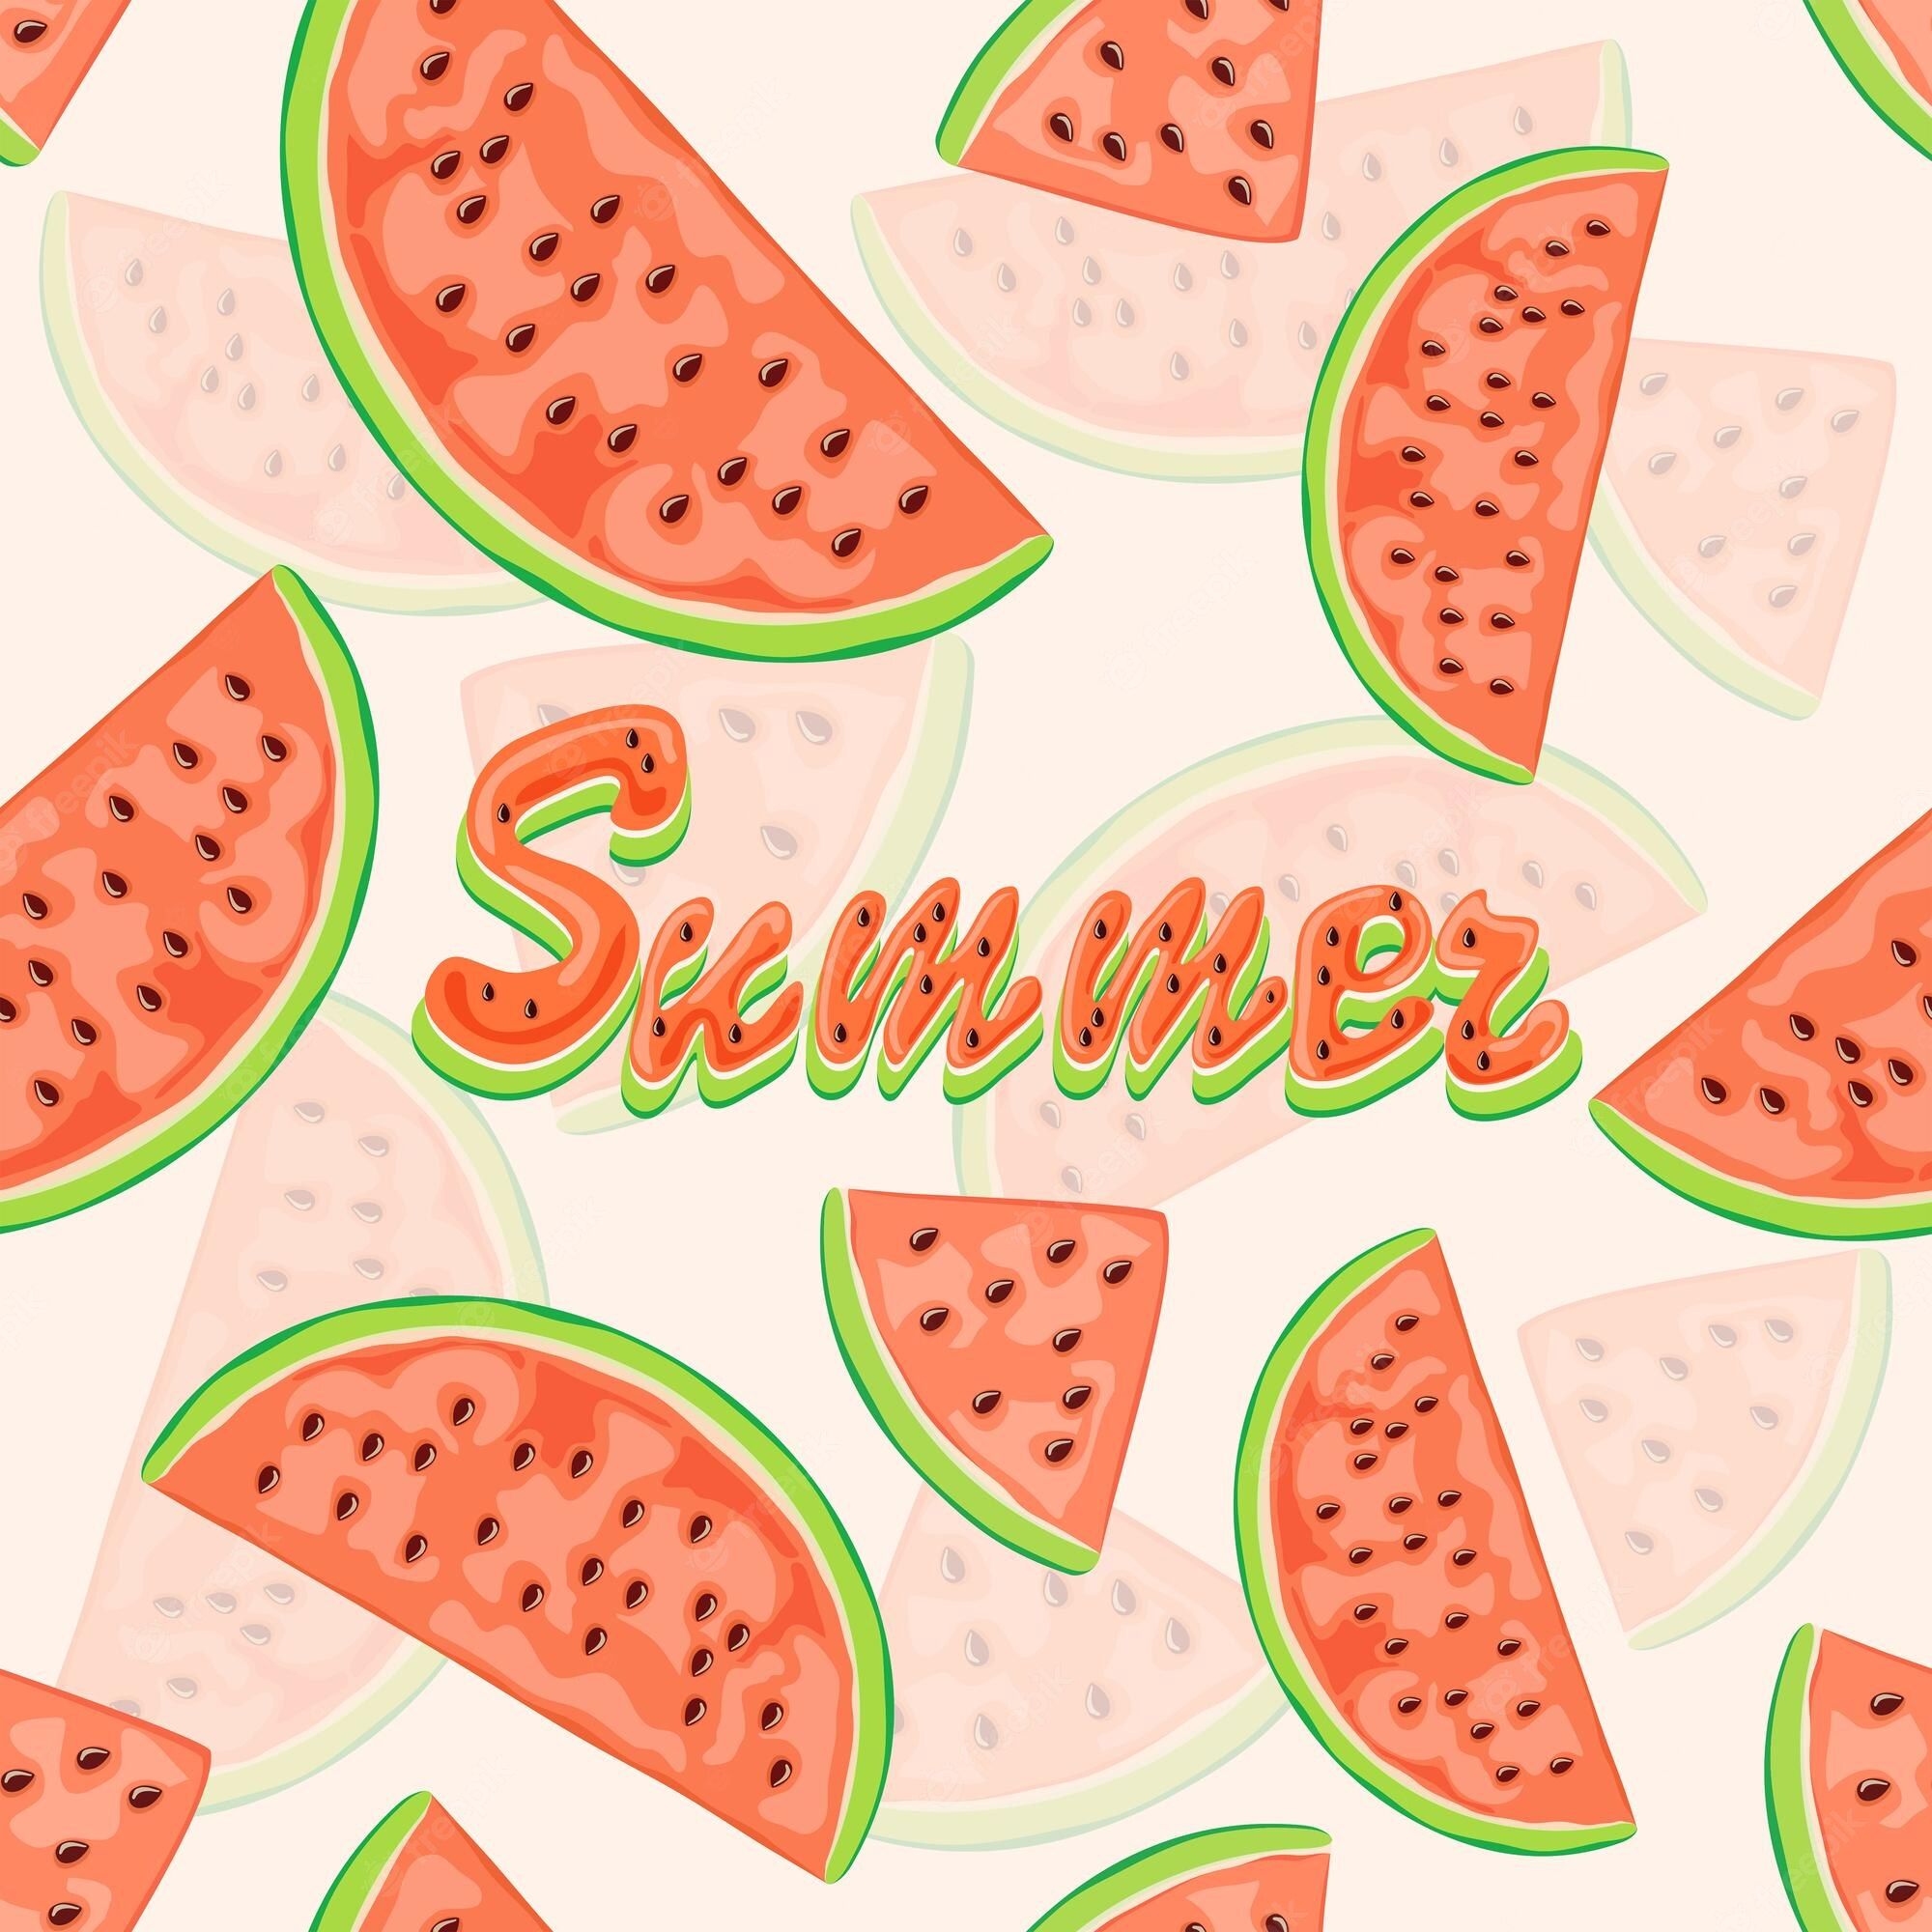 Premium Vector. Seamless background with red juicy watermelon slices and lettering summer wallpaper with ripe fruit on white background illustration